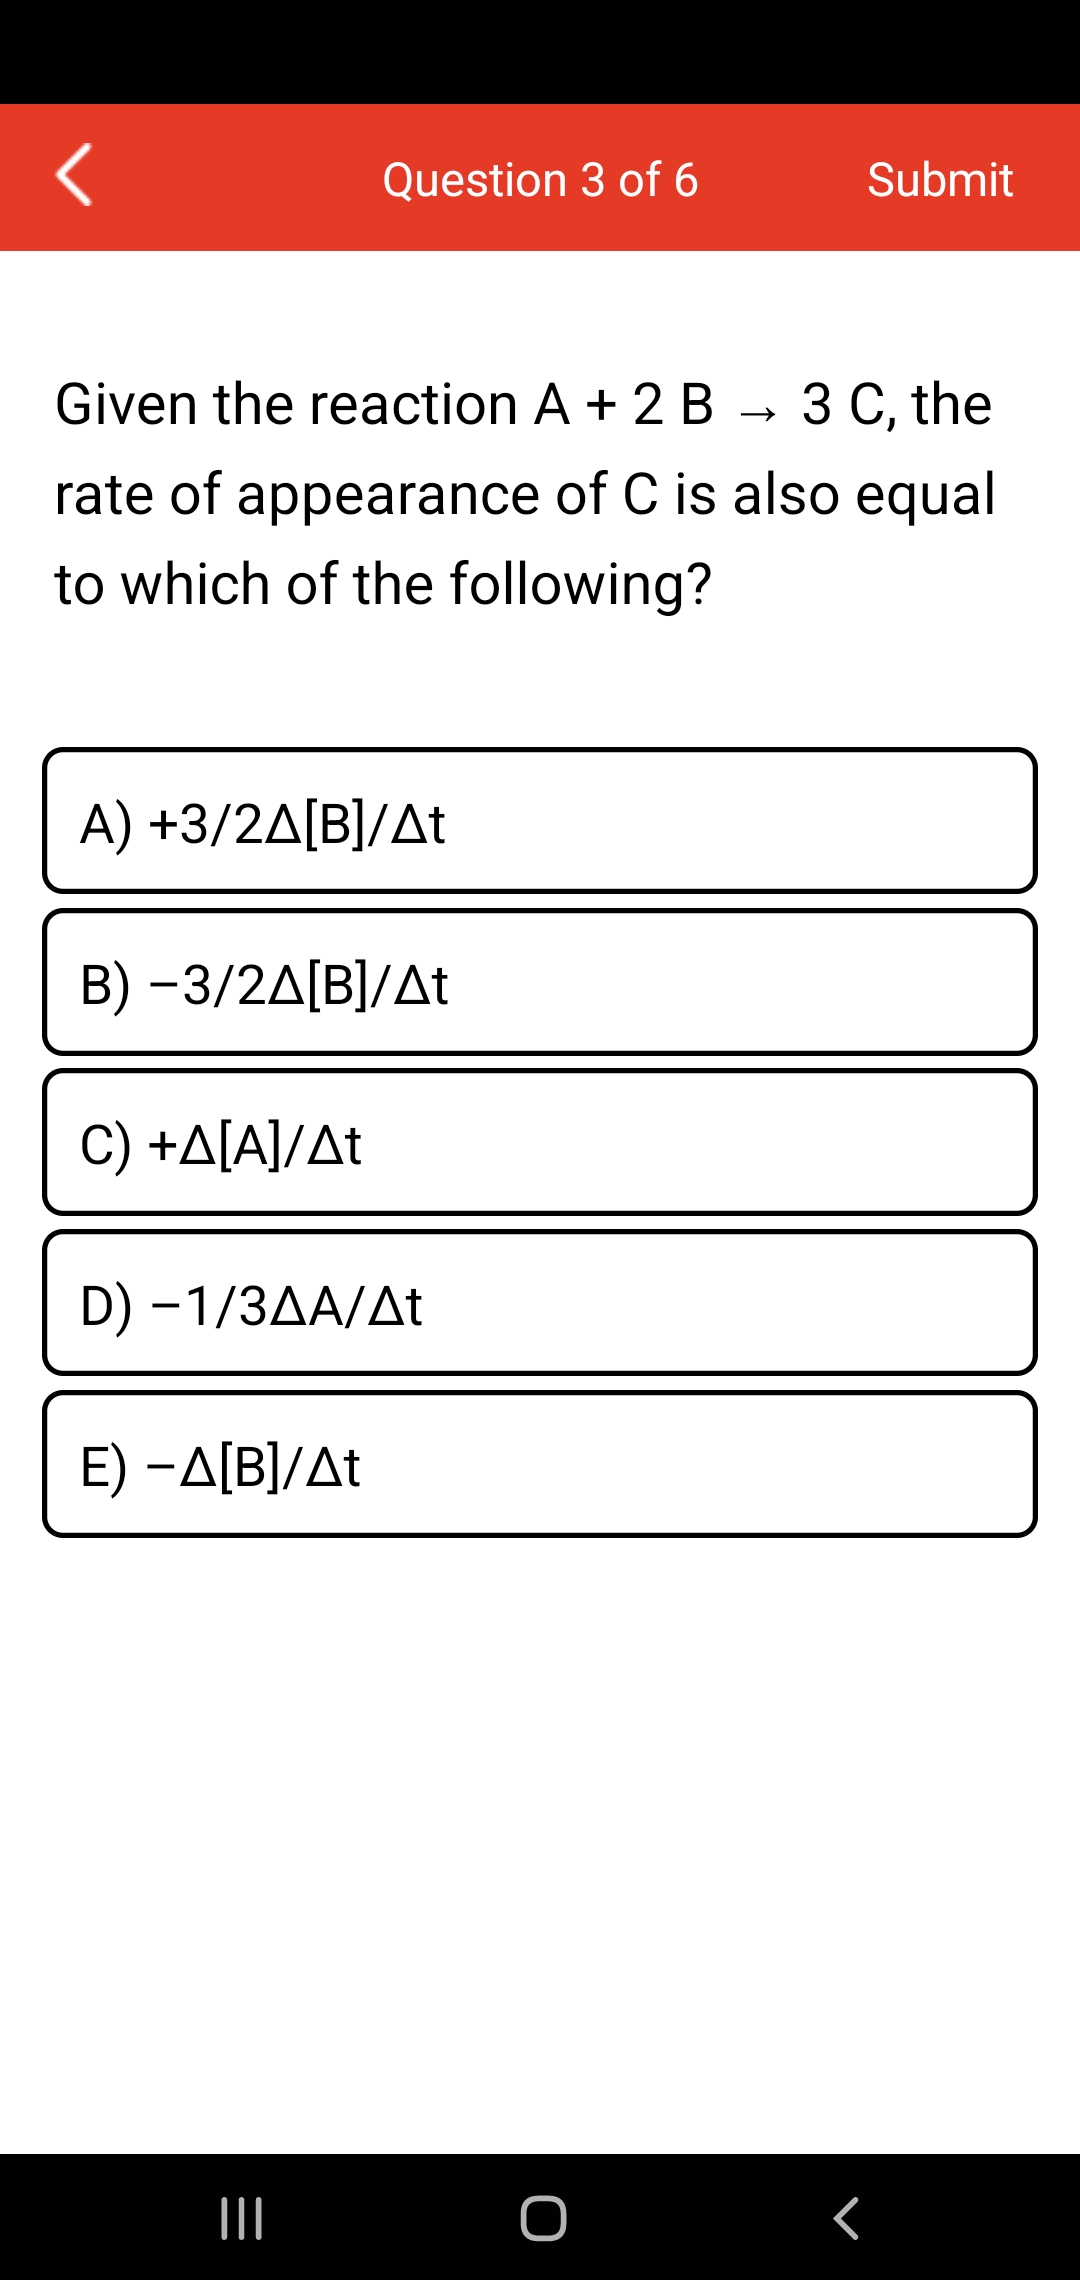 Question 3 of 6
Submit
Given the reaction A + 2 B
З С the
rate of appearance of C is also equal
to which of the following?
A) +3/2ΔΒ|/Δt
B )-3/2ΔΒ]/Δt
C) +A[A]/At
D) -1/3AA/At
E) -A[B]/At
